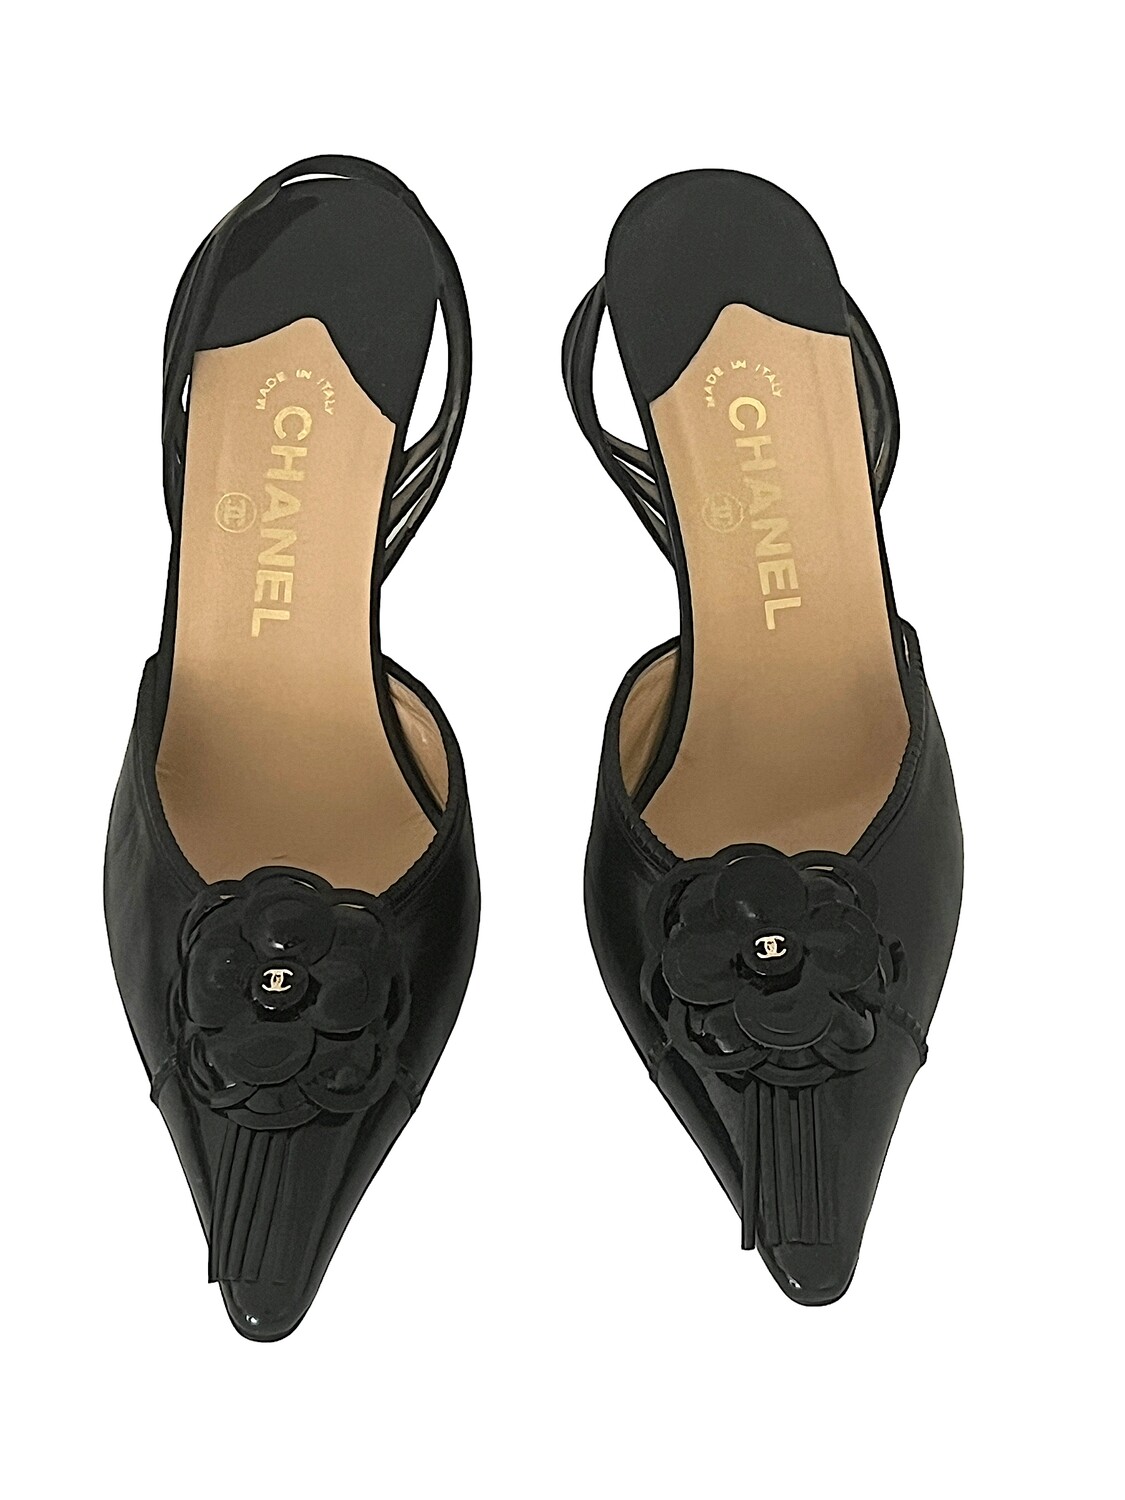 CHANEL Camellia Sandals for Women for sale